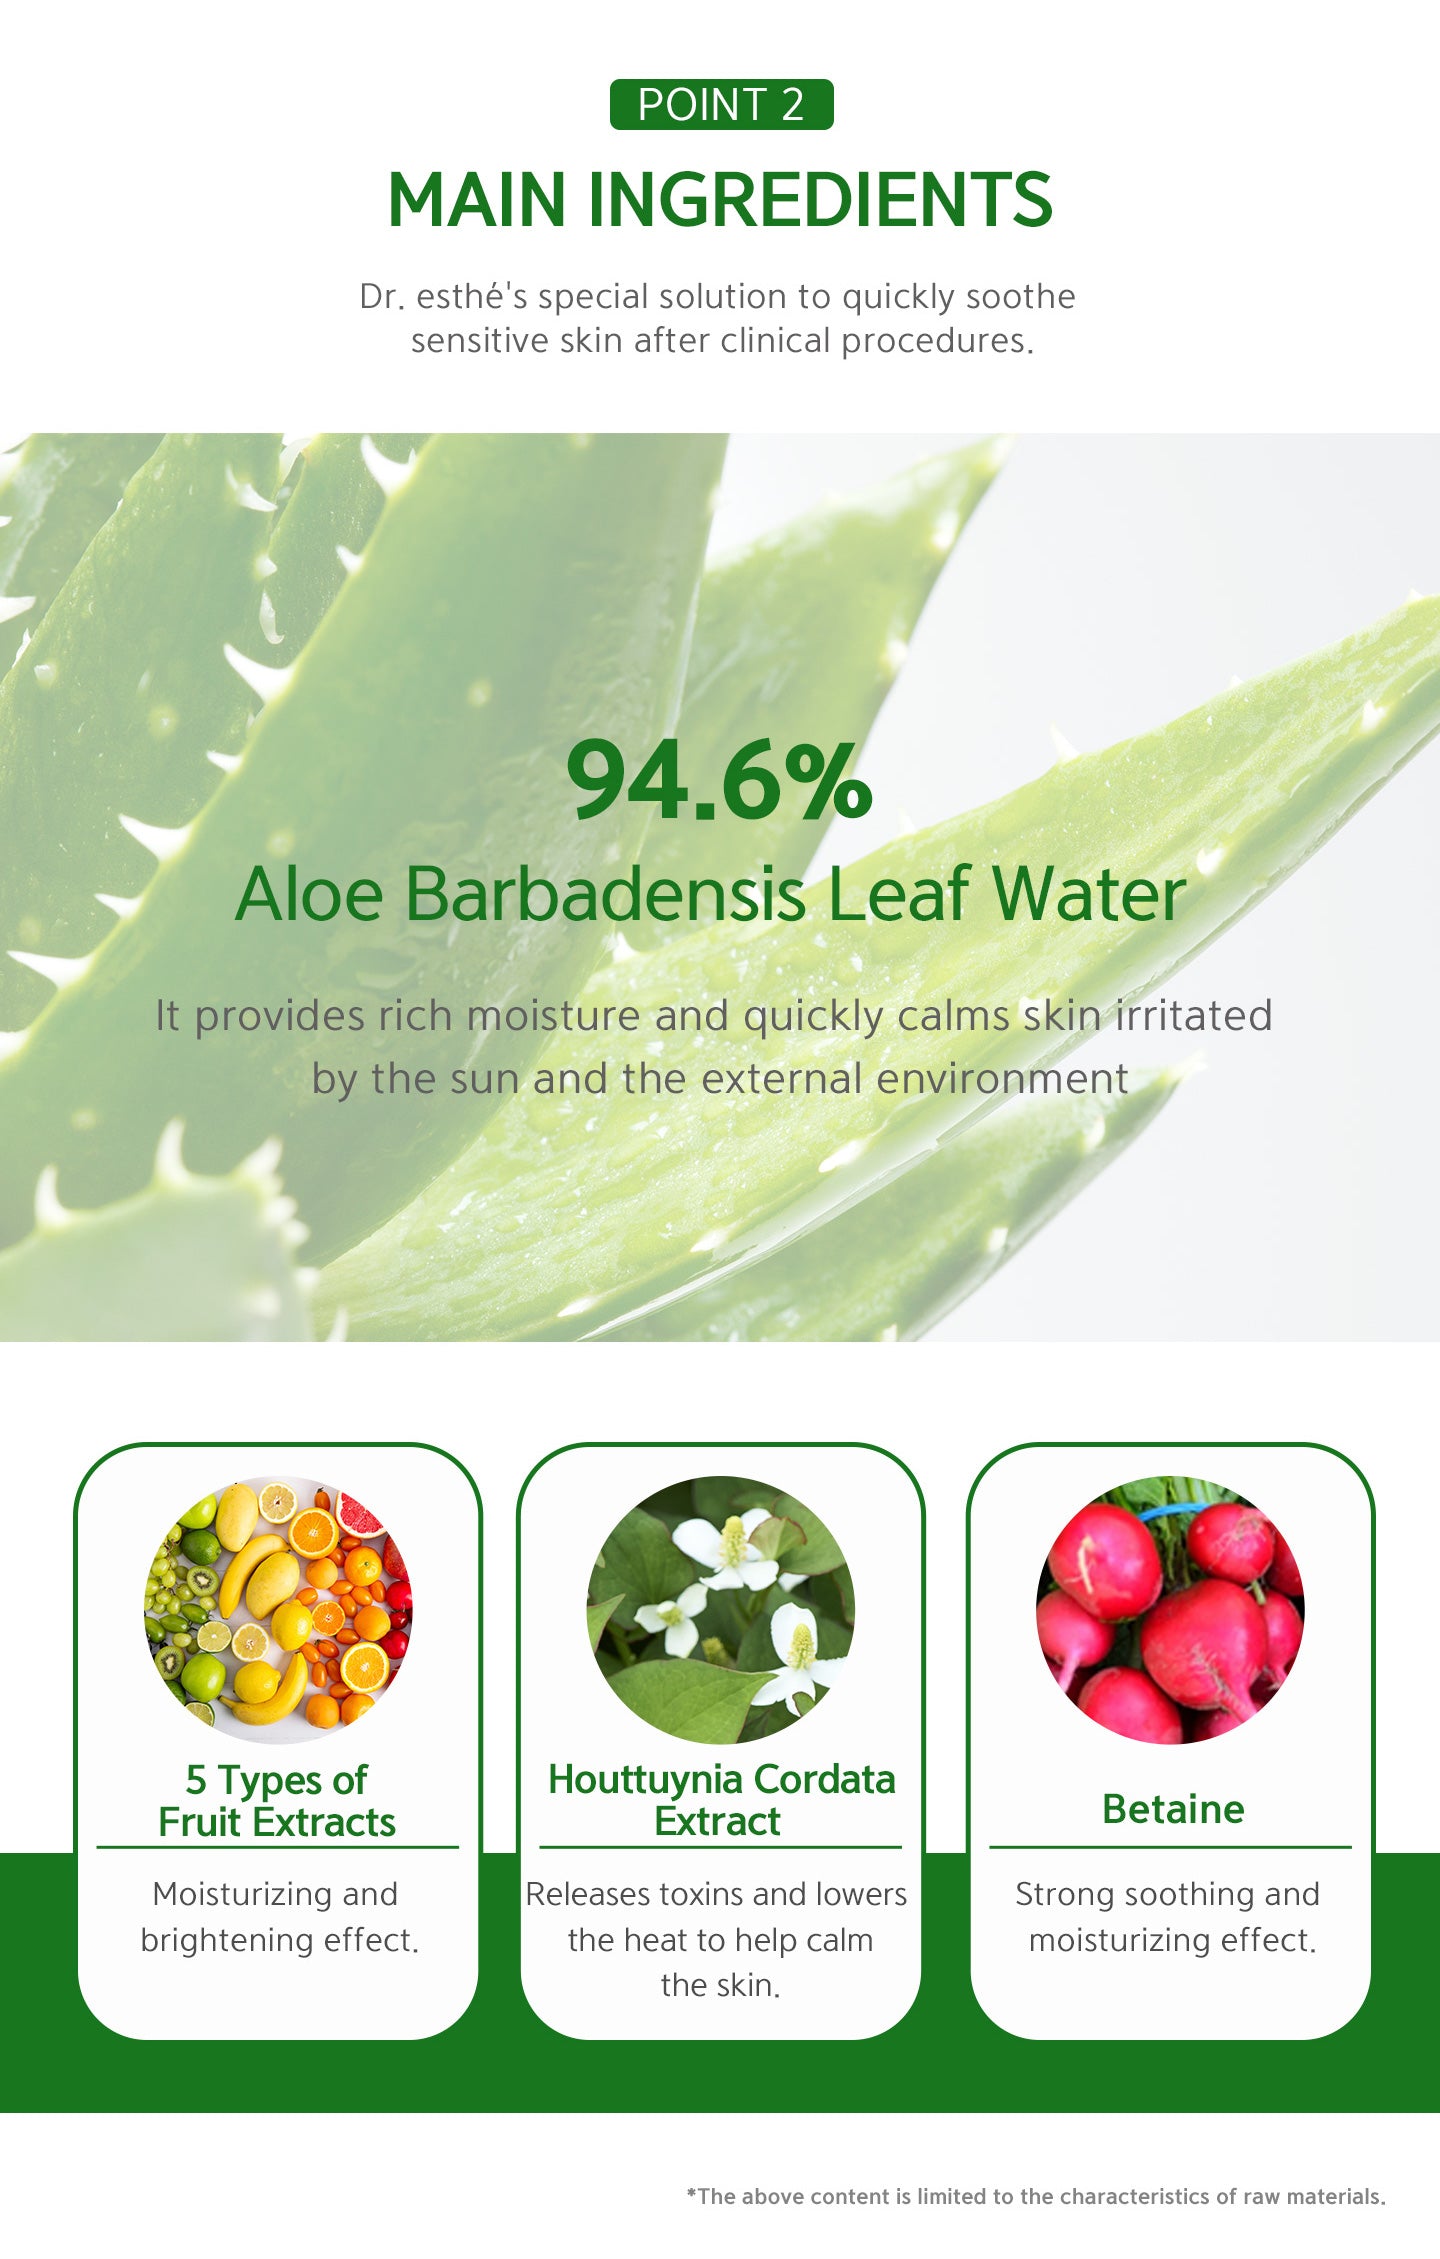 94.6% aloe barbadensis leaf water. It provides rich moisture and quickly calms skin irritated by the sun and the external environment. 5 types of fruit extracts, houttuynia cordata extract and betaine. 